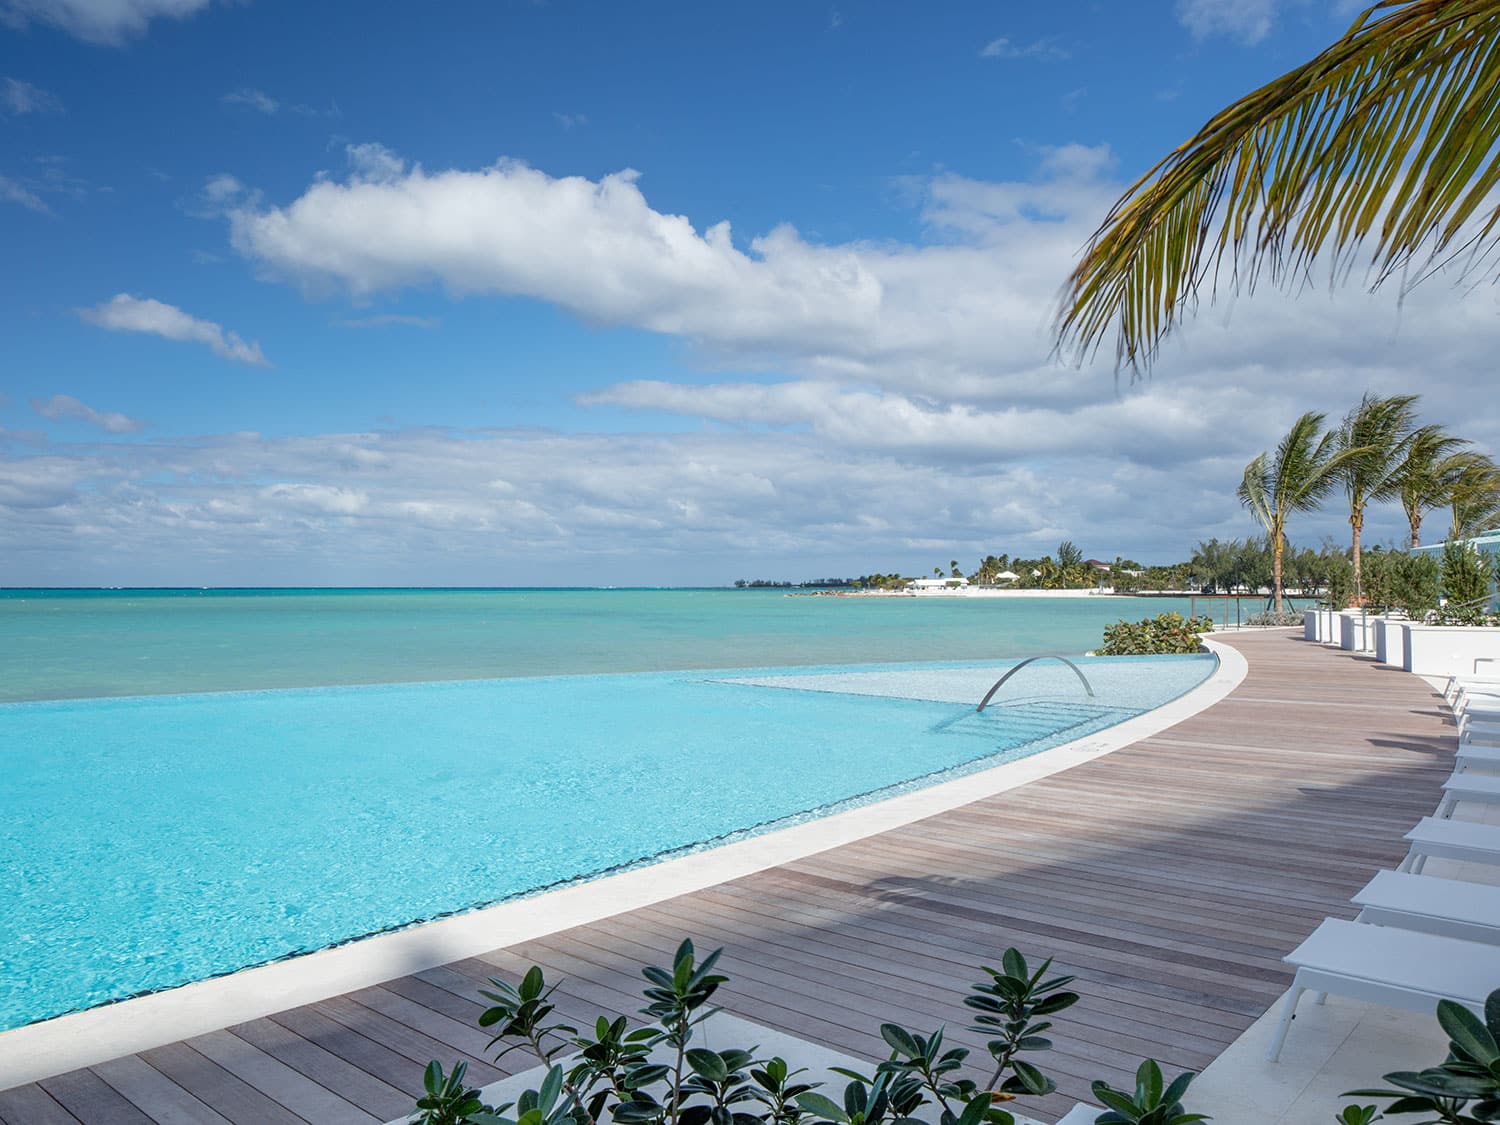 The view from the infinity pool at the Goldwynn Resort in Nassau, Bahamas.